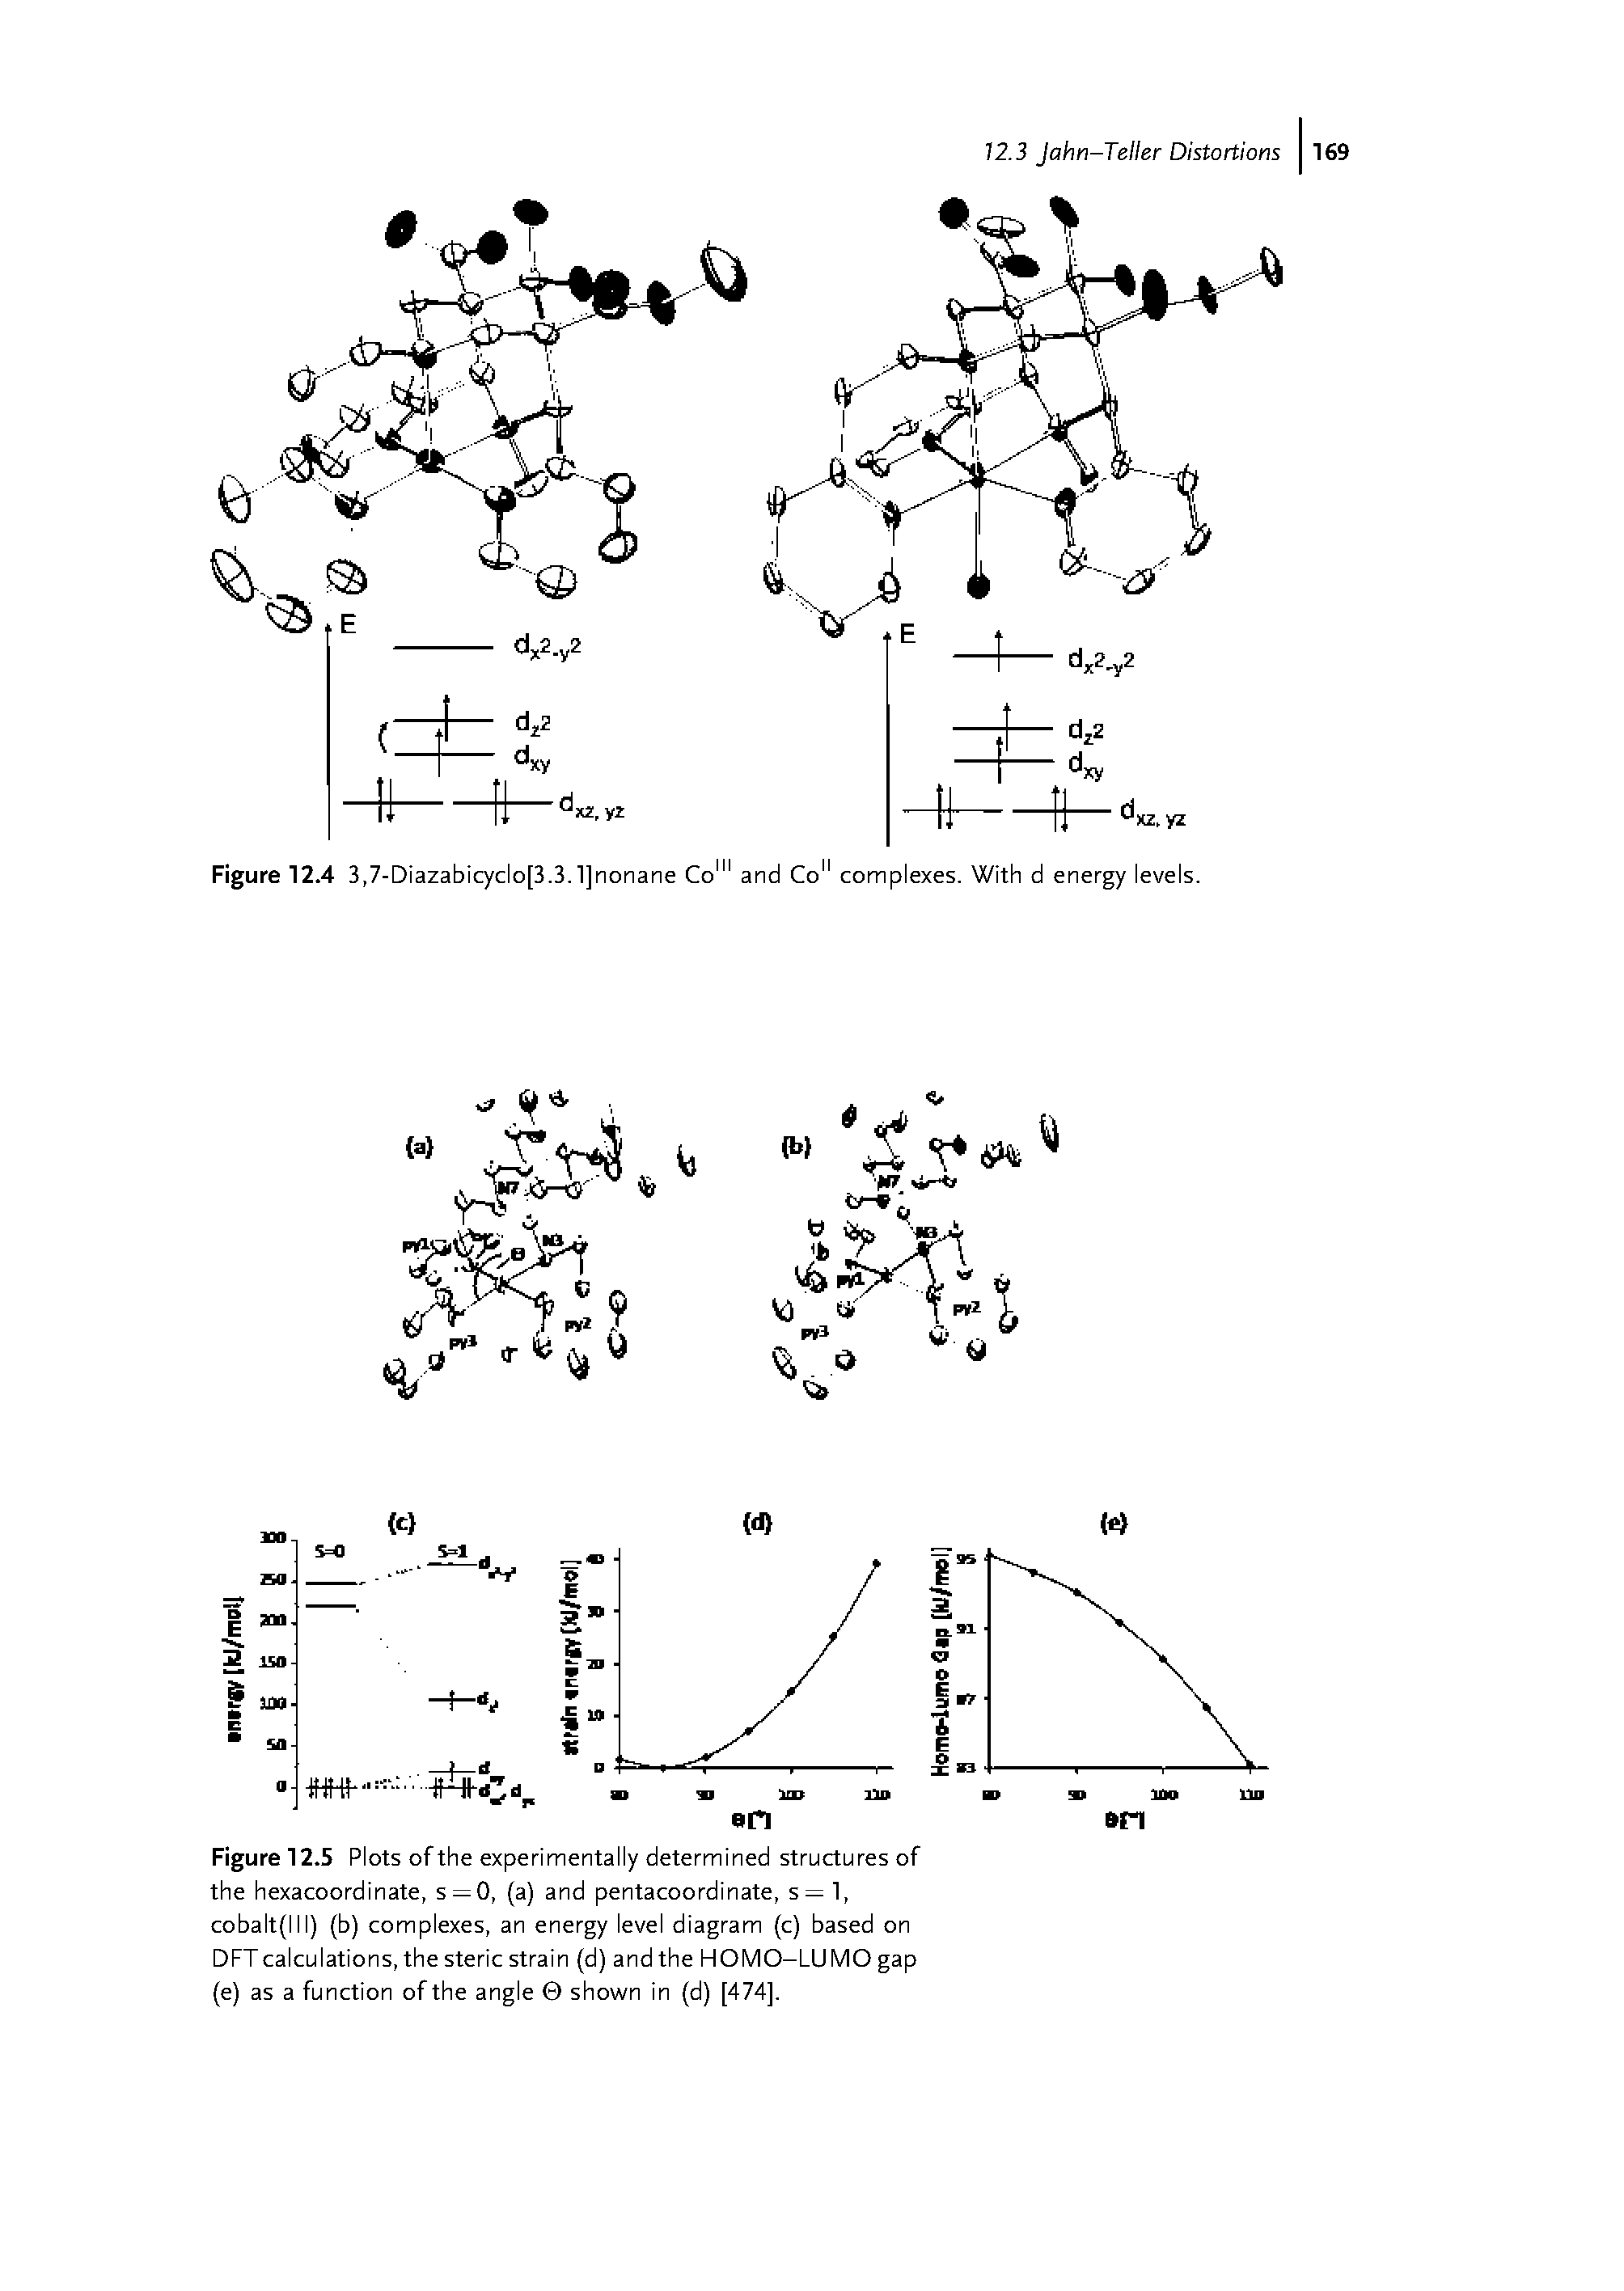 Figure 12.5 Plots of the experimentally determined structures of the hexacoordinate, s = 0, (a) and pentacoordinate, s= 1, cobalt(lll) (b) complexes, an energy level diagram (c) based on DFTcalculations, the steric strain (d) and the HOMO-LUMO gap (e) as a function of the angle shown in (d) [474].